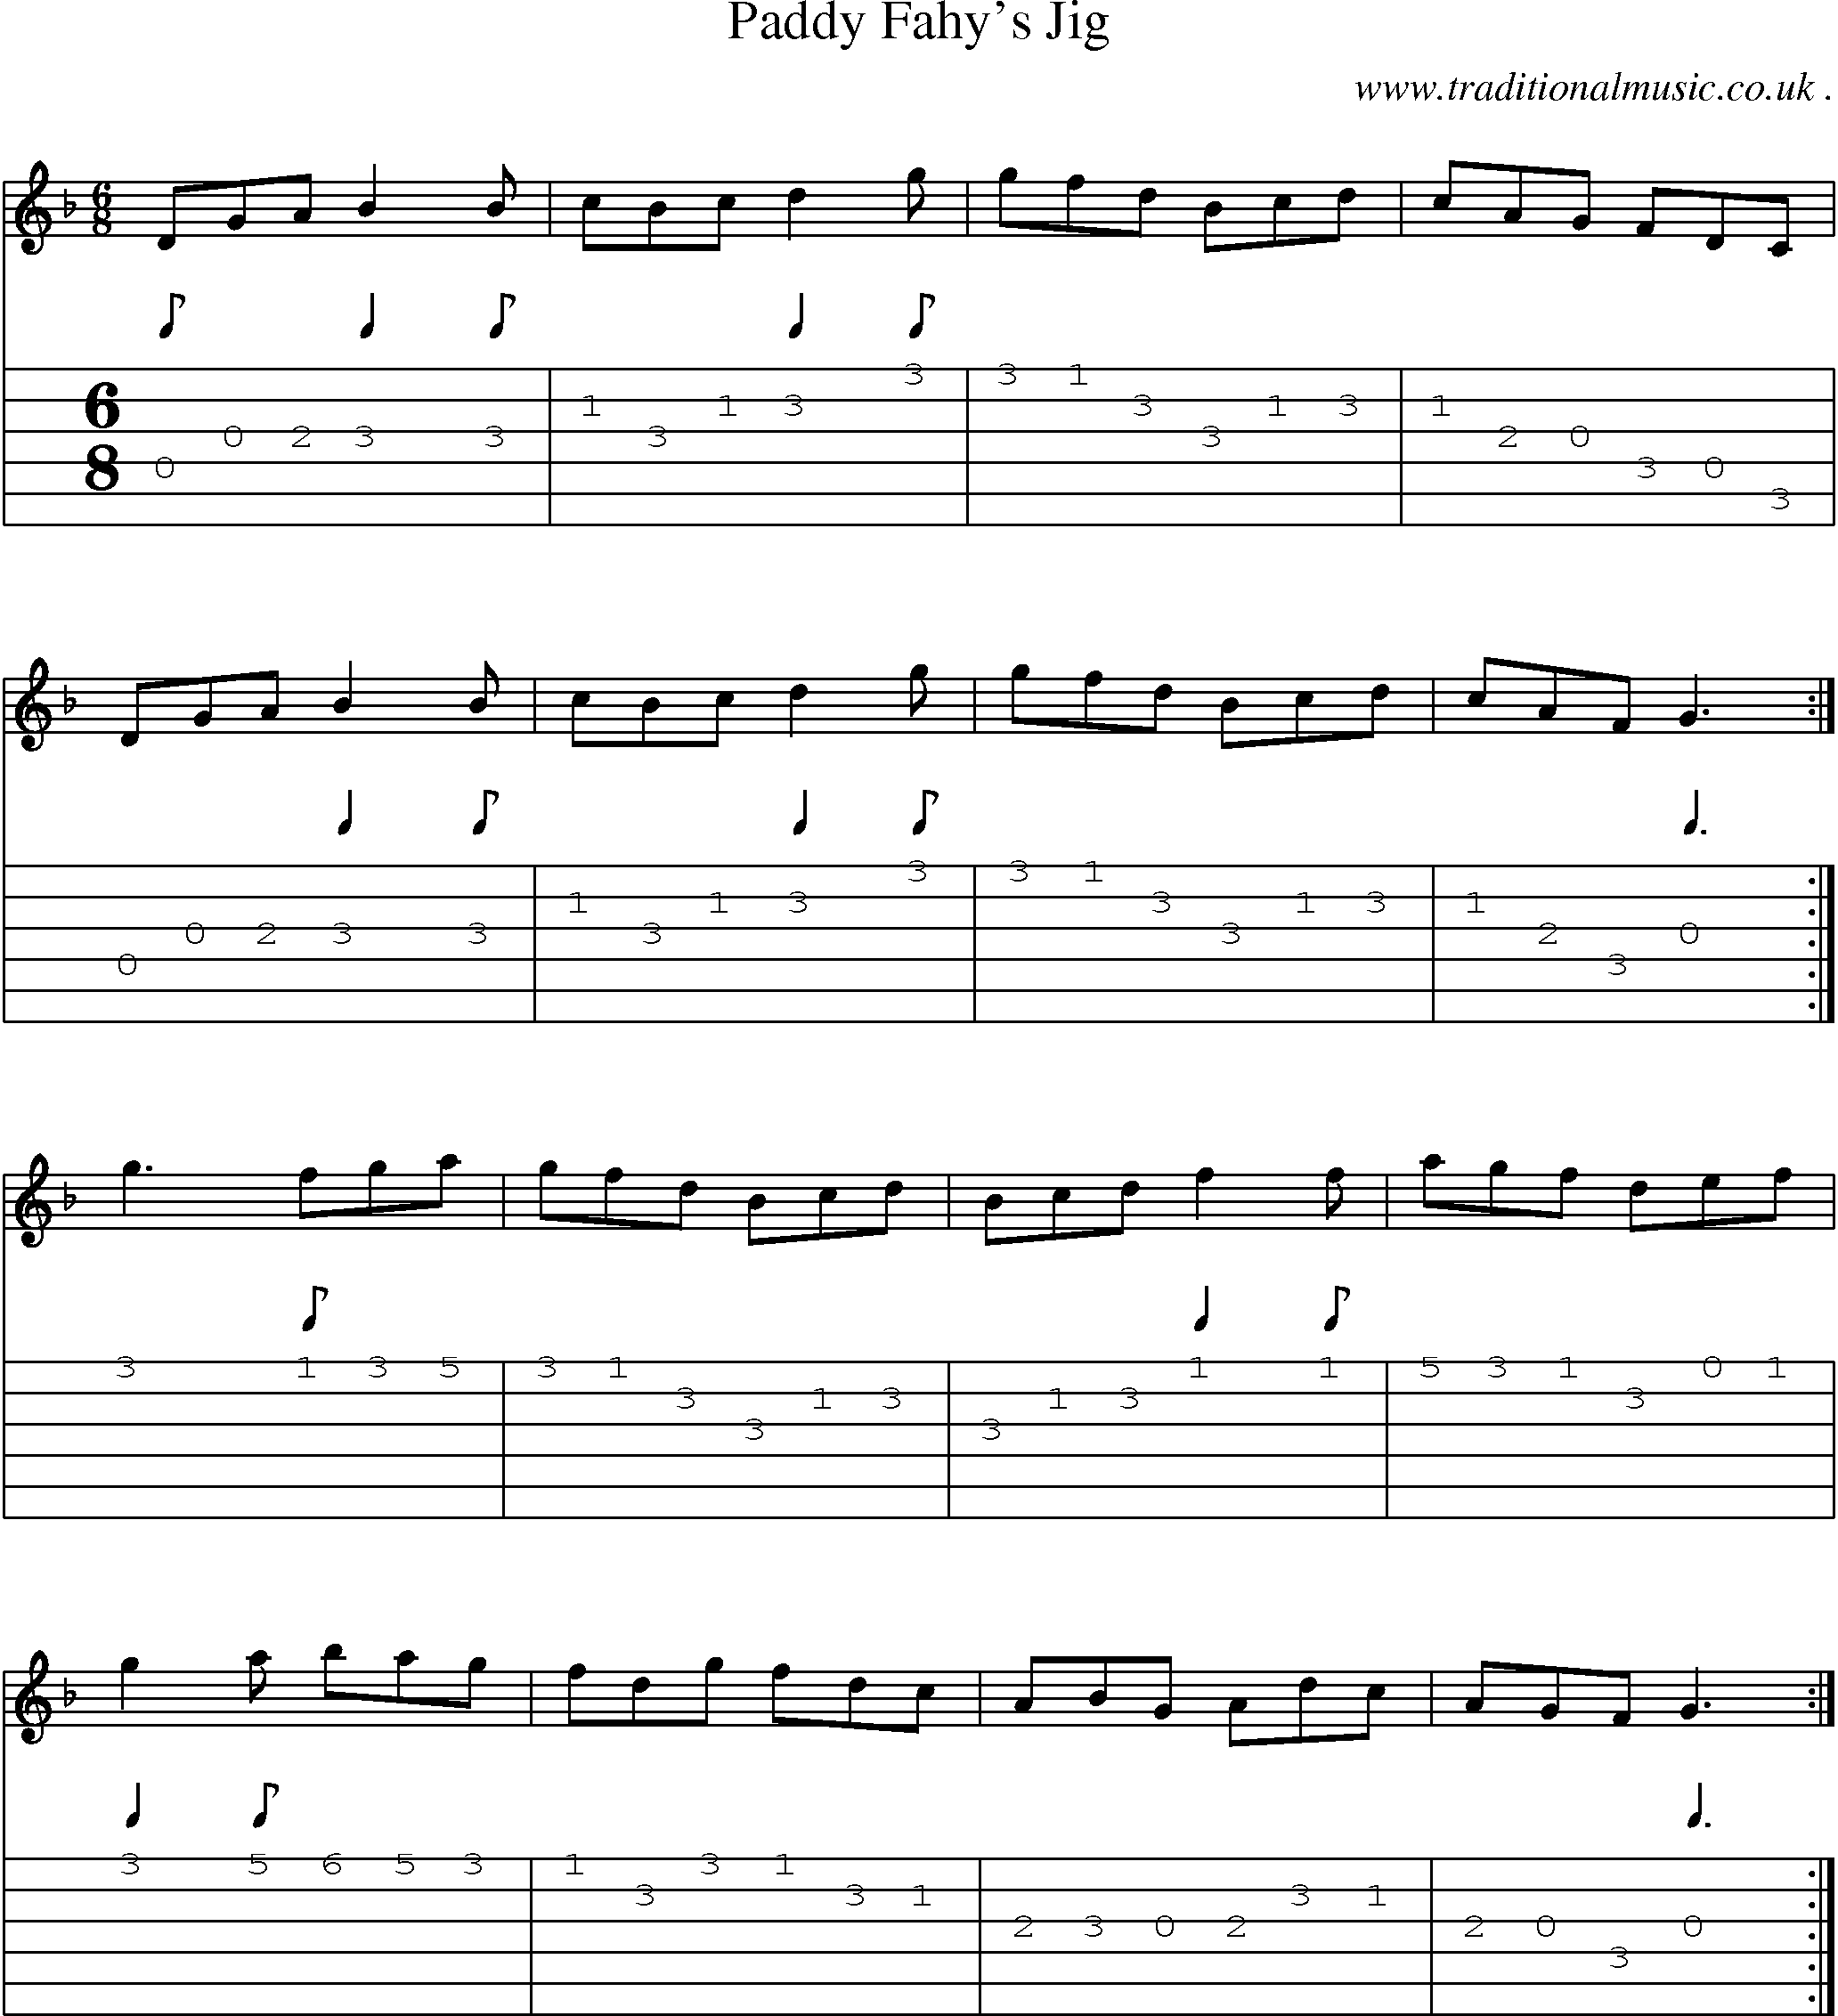 Sheet-Music and Guitar Tabs for Paddy Fahys Jig